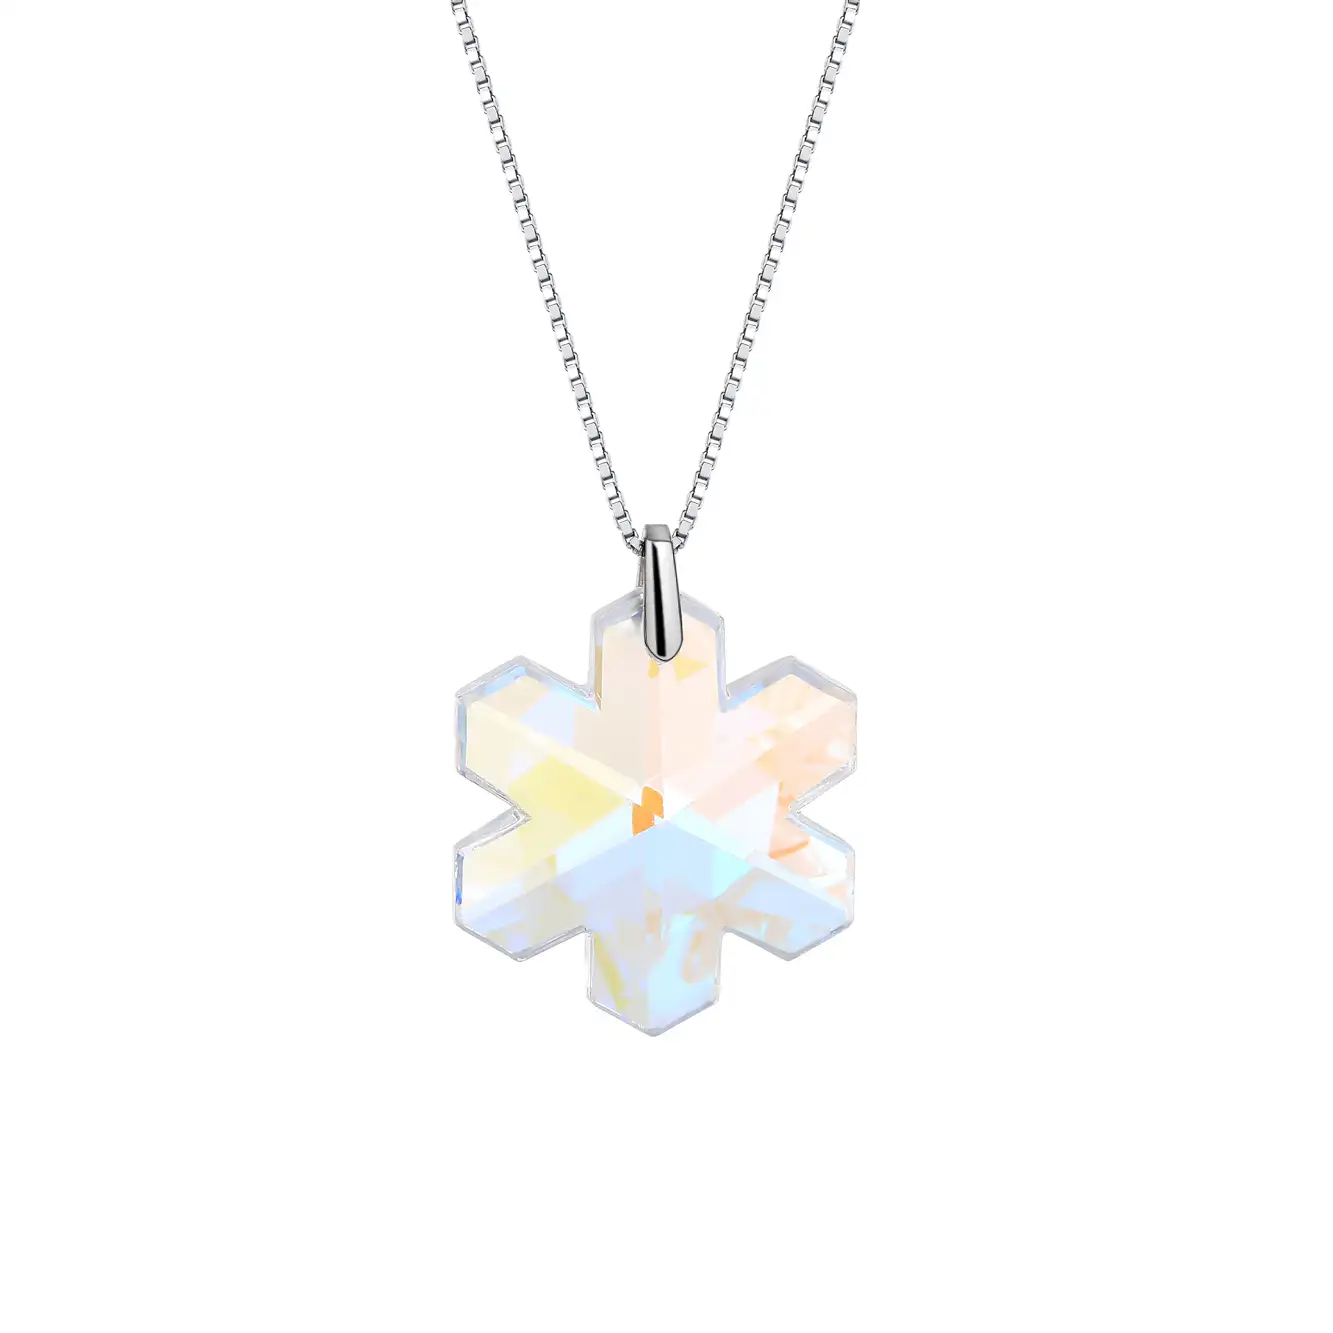 Crystals from Swarovski Snowflake Pendant Necklace 80200107